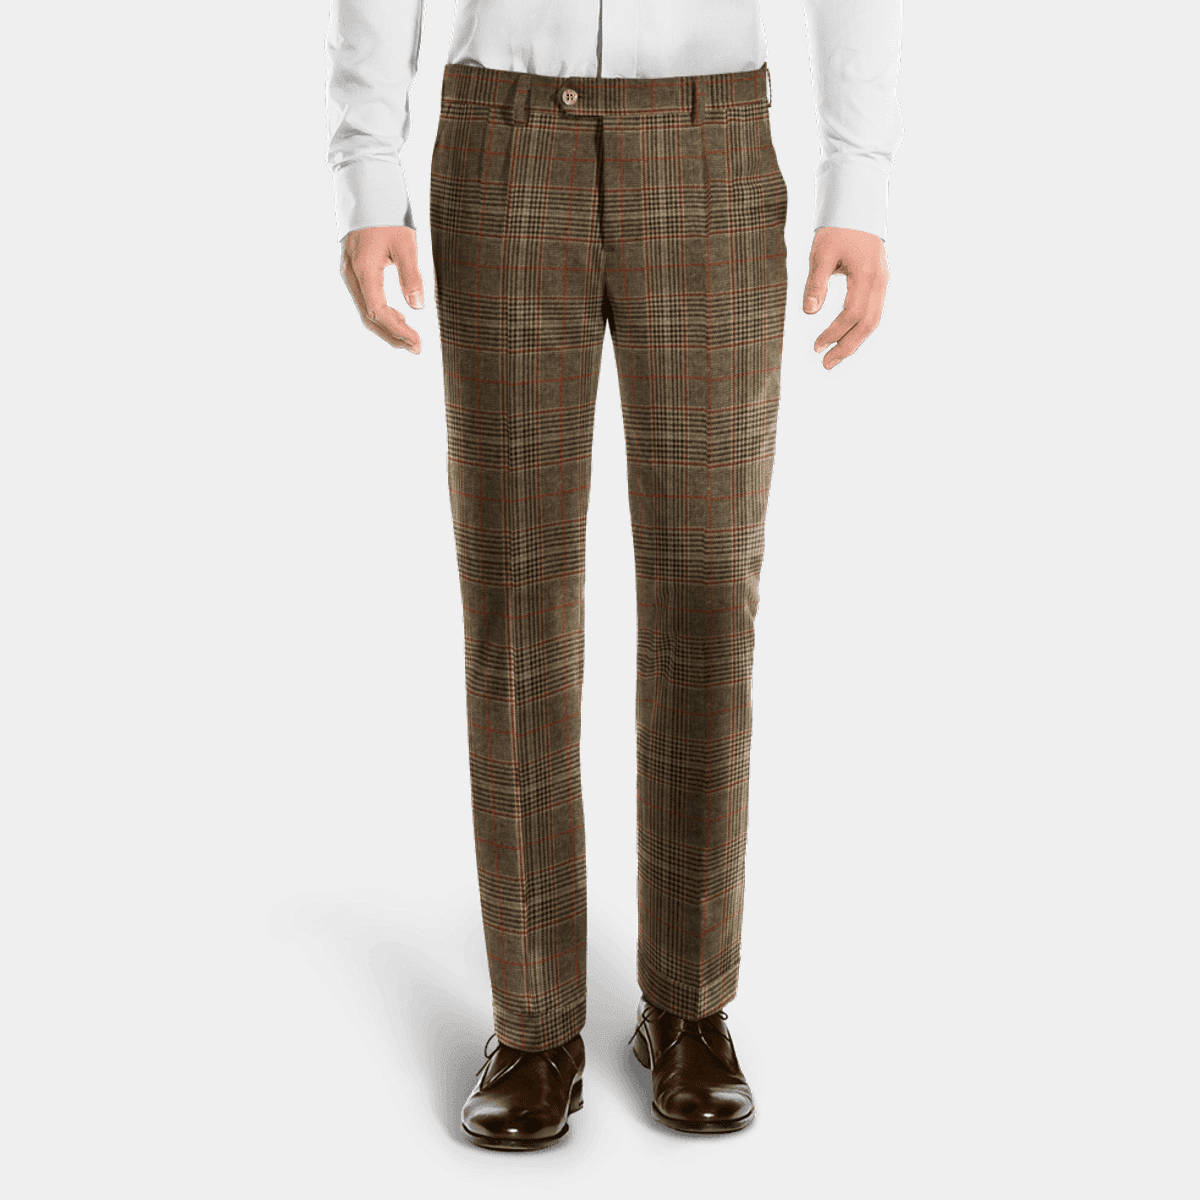 Men's Brown Cotton Checked Formal Trousers at Rs 992.00 | Men Trousers |  ID: 2851929713088